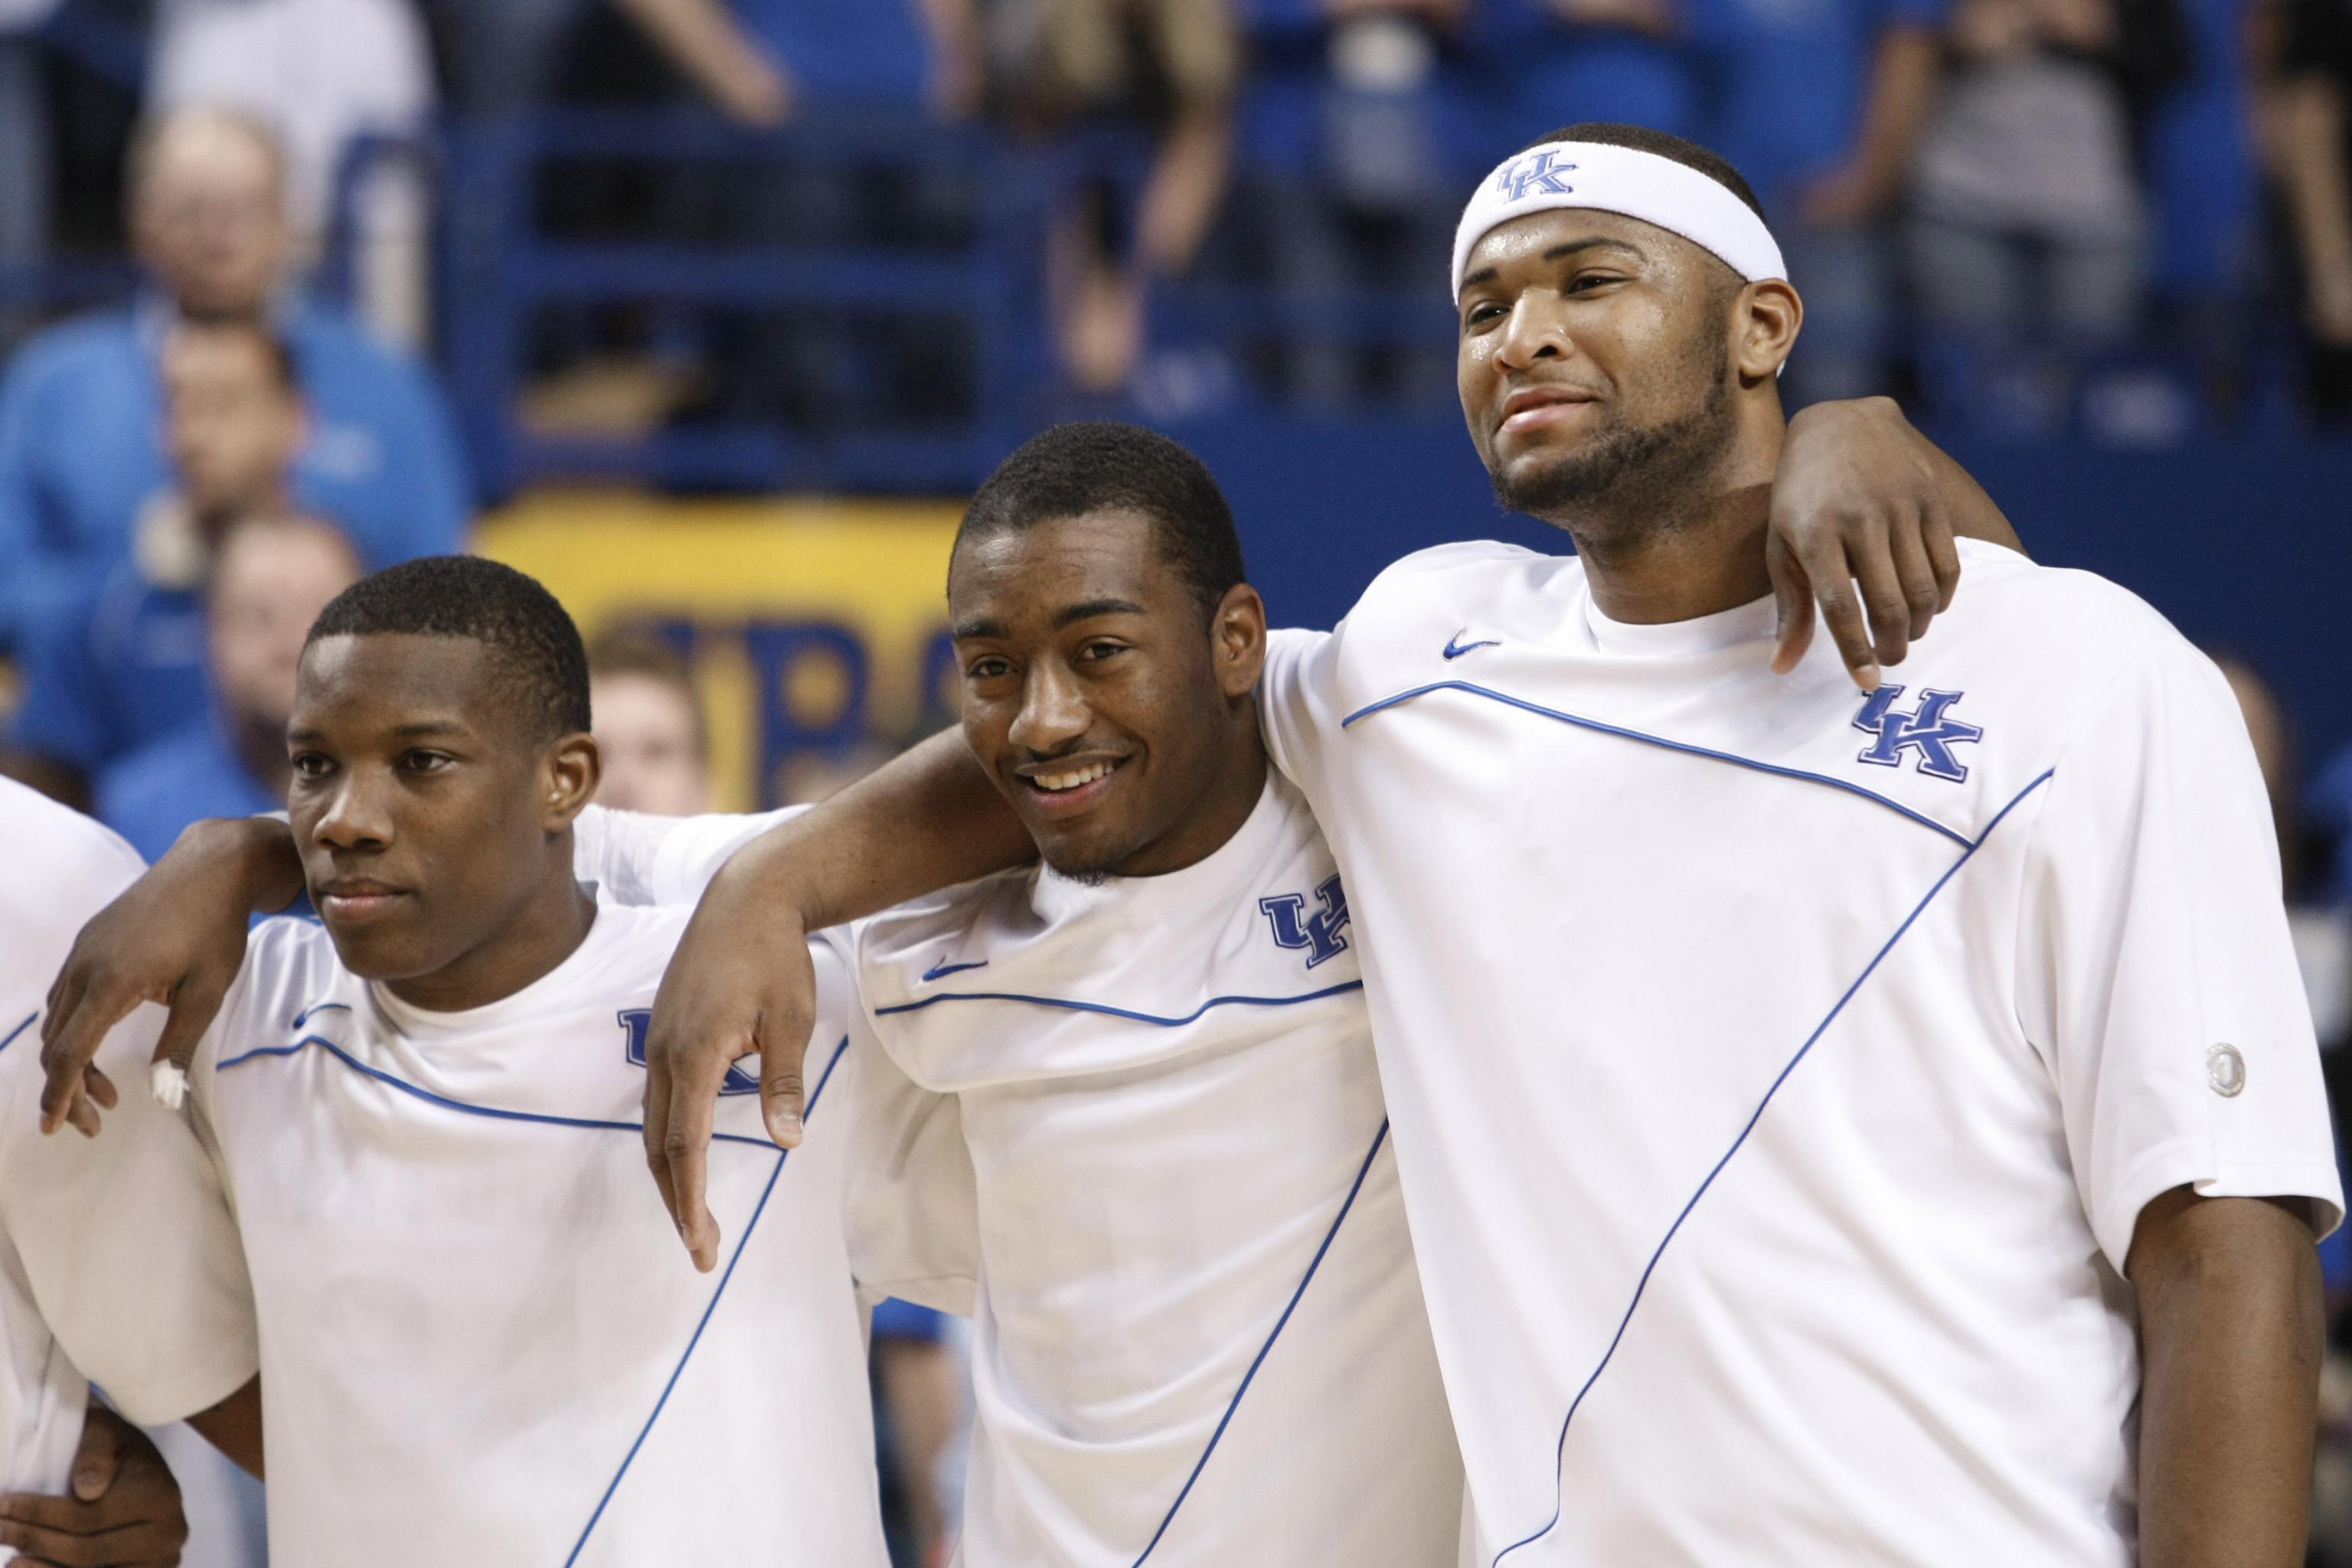 Kentucky basketball's DeMarcus Cousins pokes fun at his persona in new ad